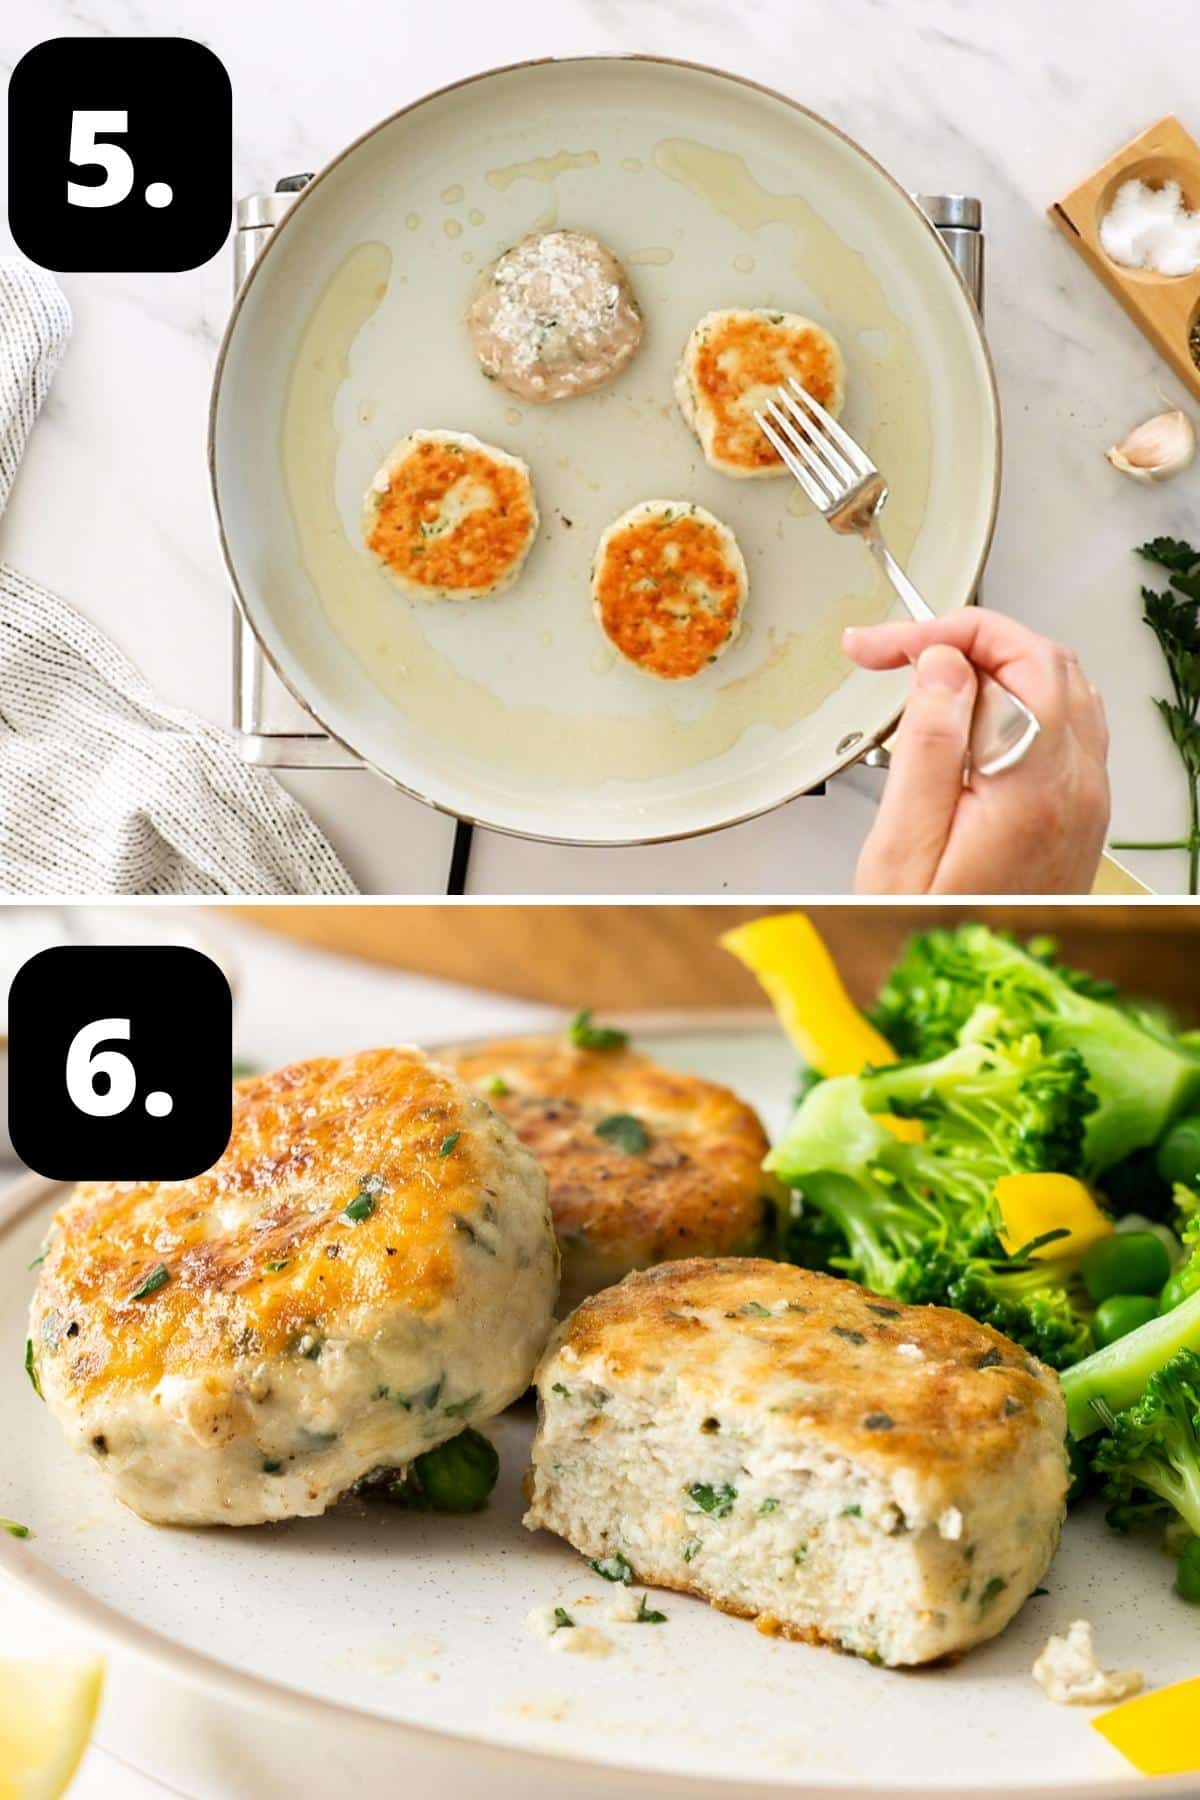 Steps 5-6 of preparing this recipe - cooking the patties in a frying pan and the cooked patties on a plate.